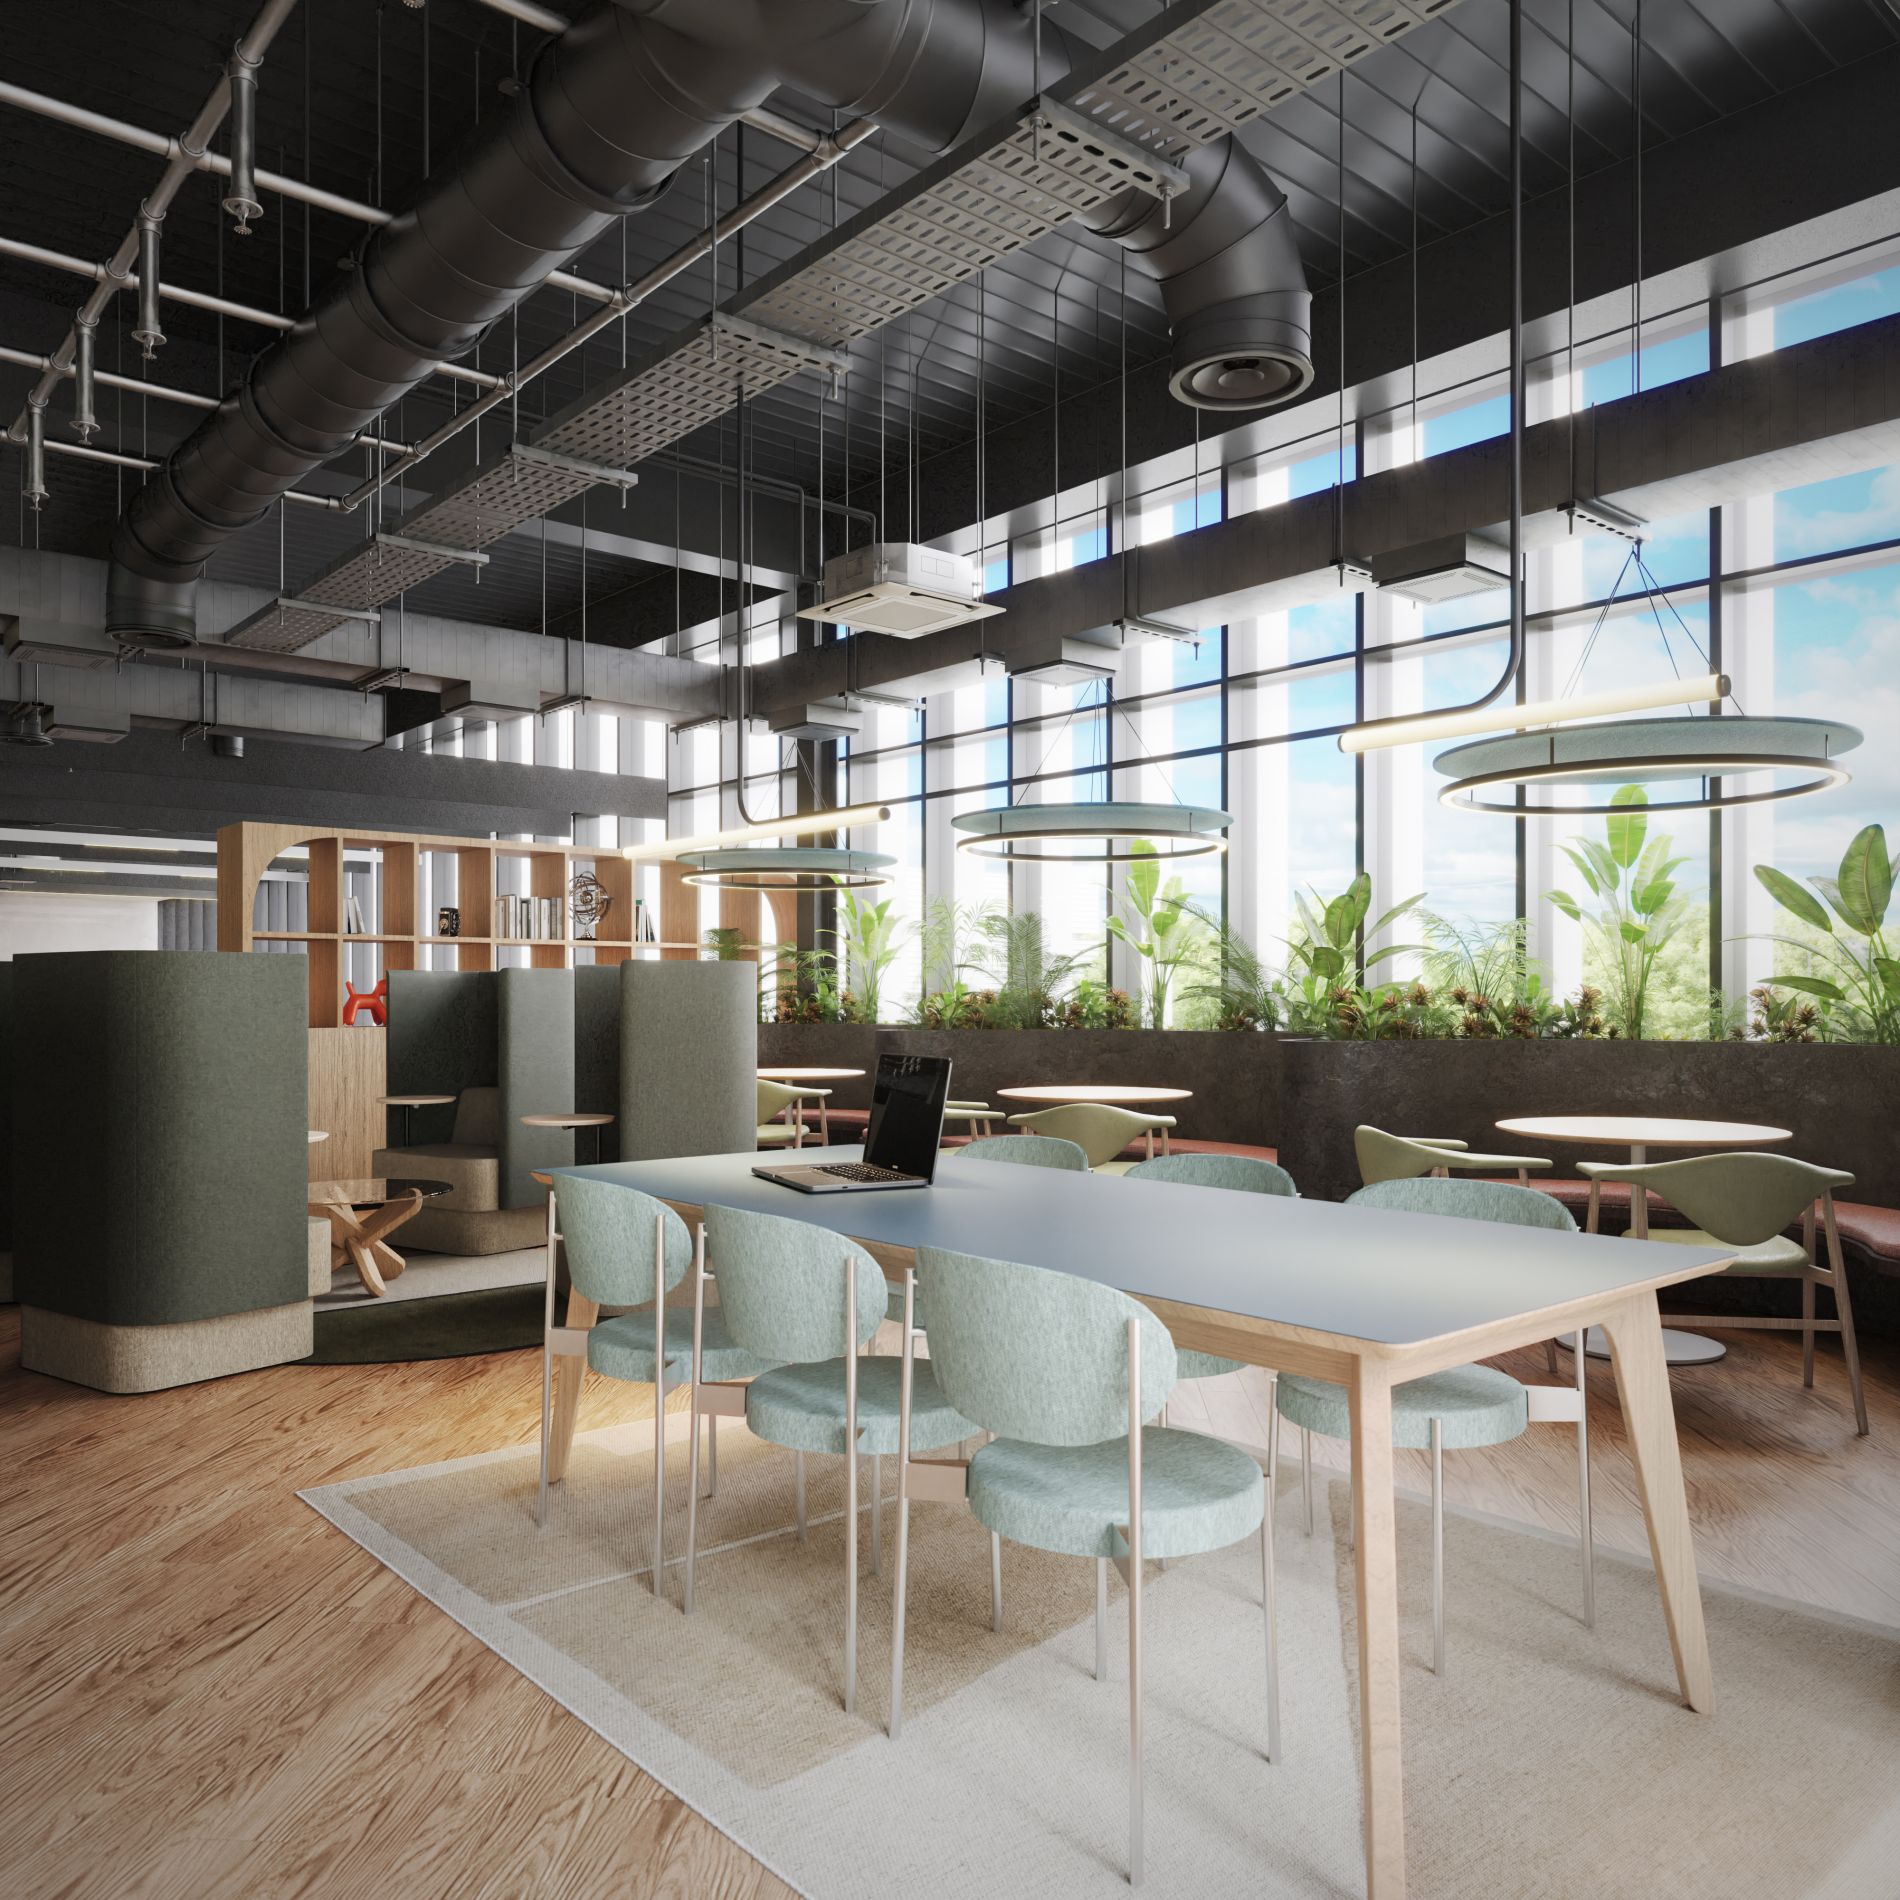 eating area in new game art studio with large windows, chairs, tables and plants